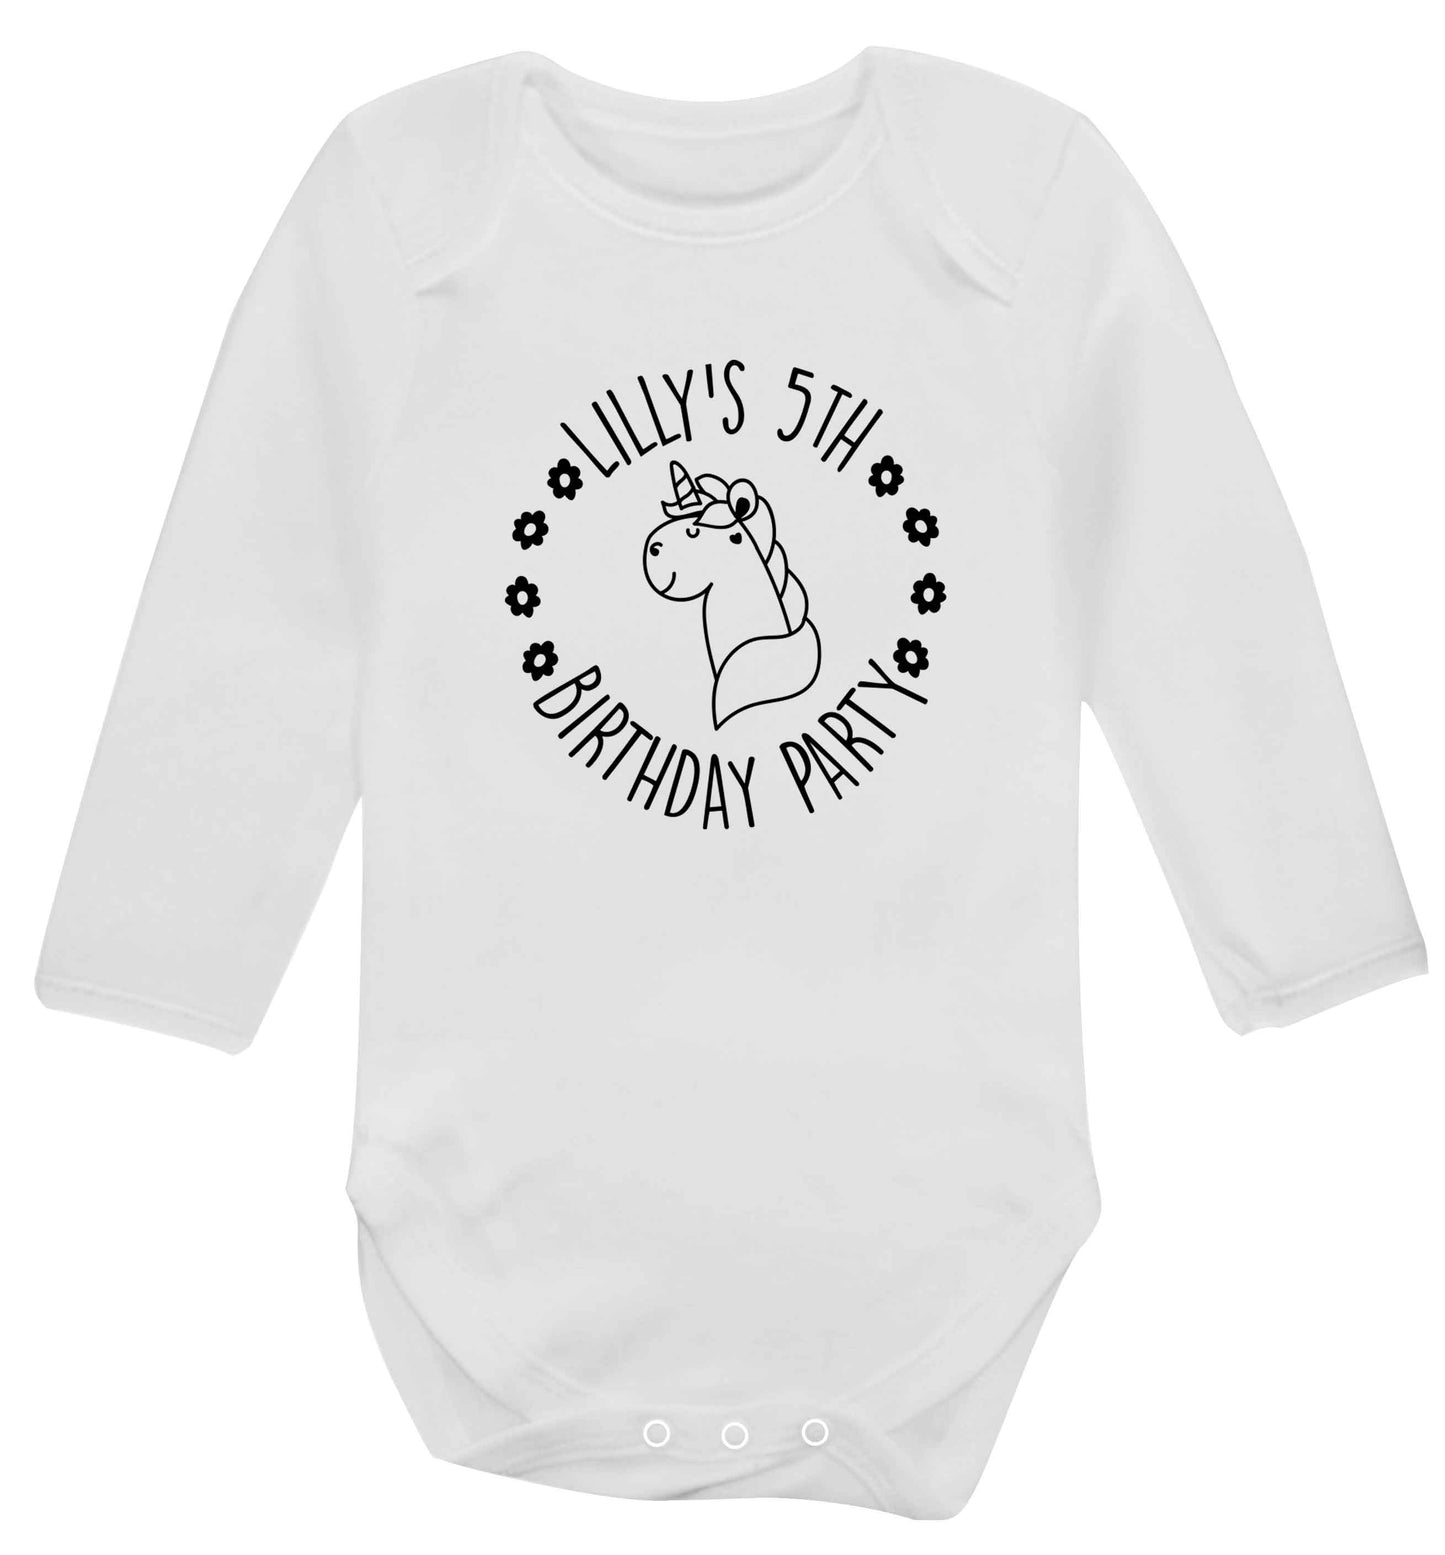 Personalised unicorn birthday party baby vest long sleeved white 6-12 months